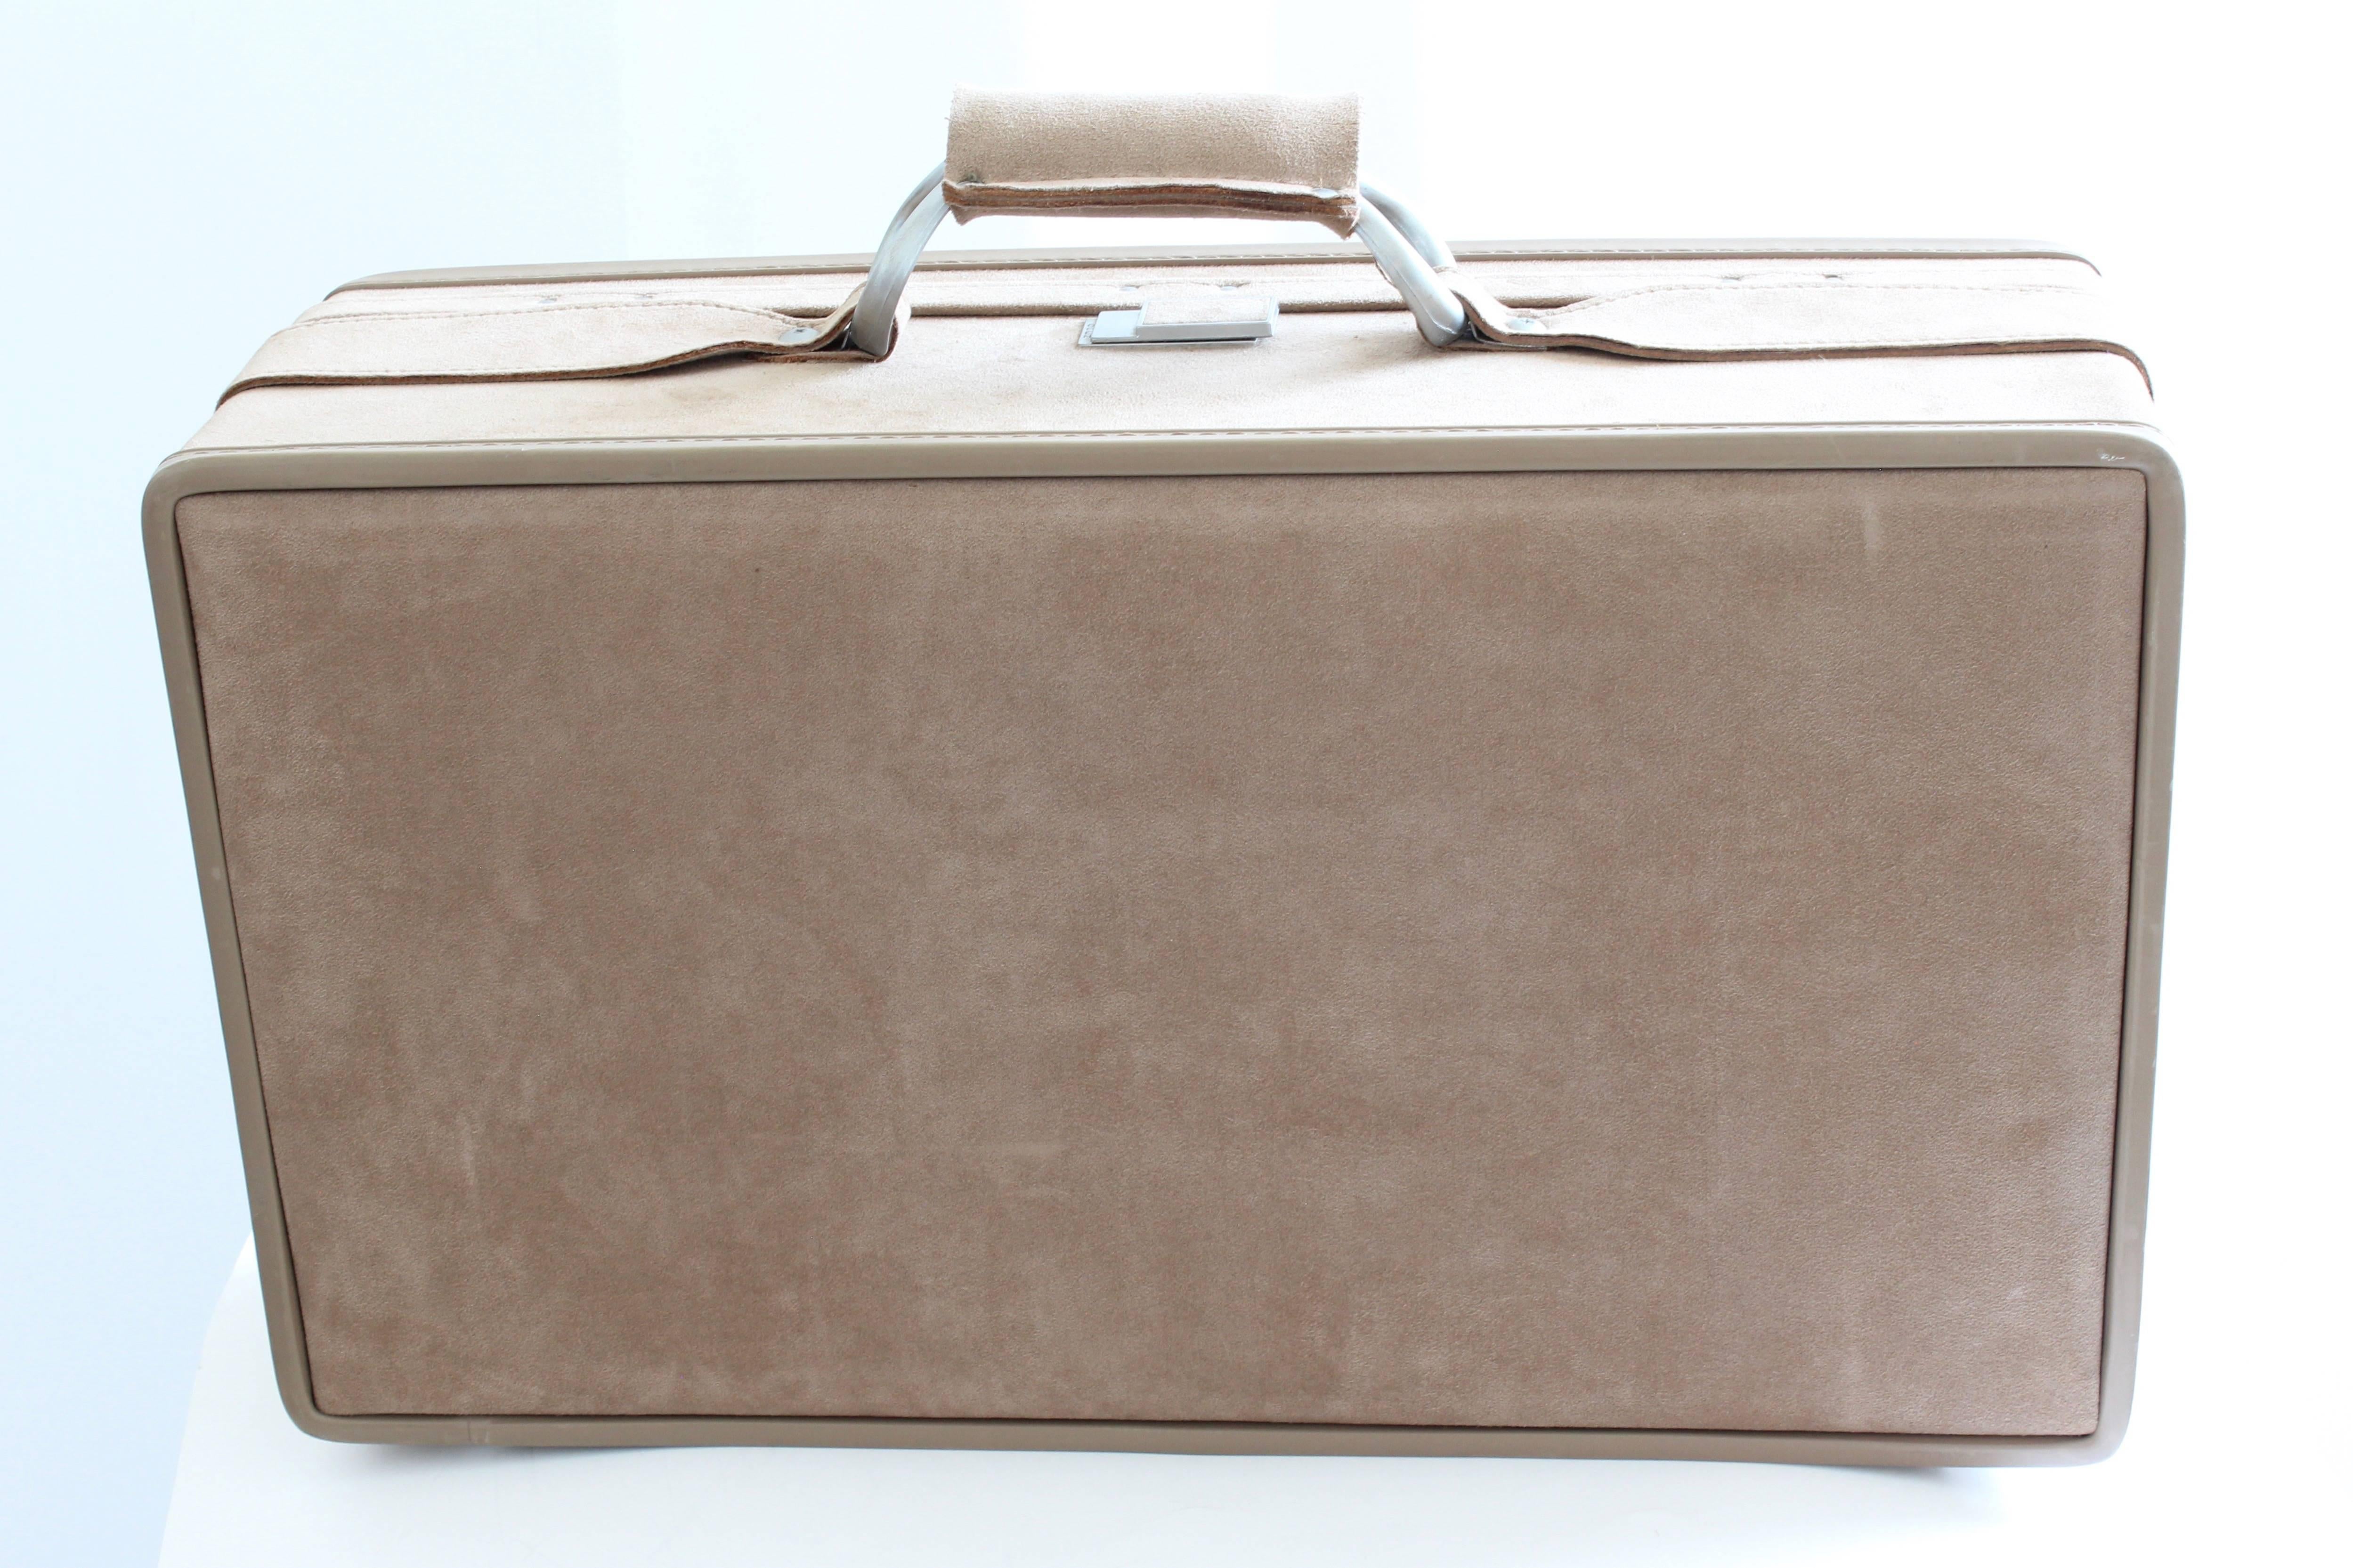 Here's a 21in belting suitcase from Hartmann, most likely made in the early 80s.  Made from taupe ultrasuede, this was part of a larger collection we recently acquired that was made by Hartmann for Halston (see images 11 & 12, where we show all bags